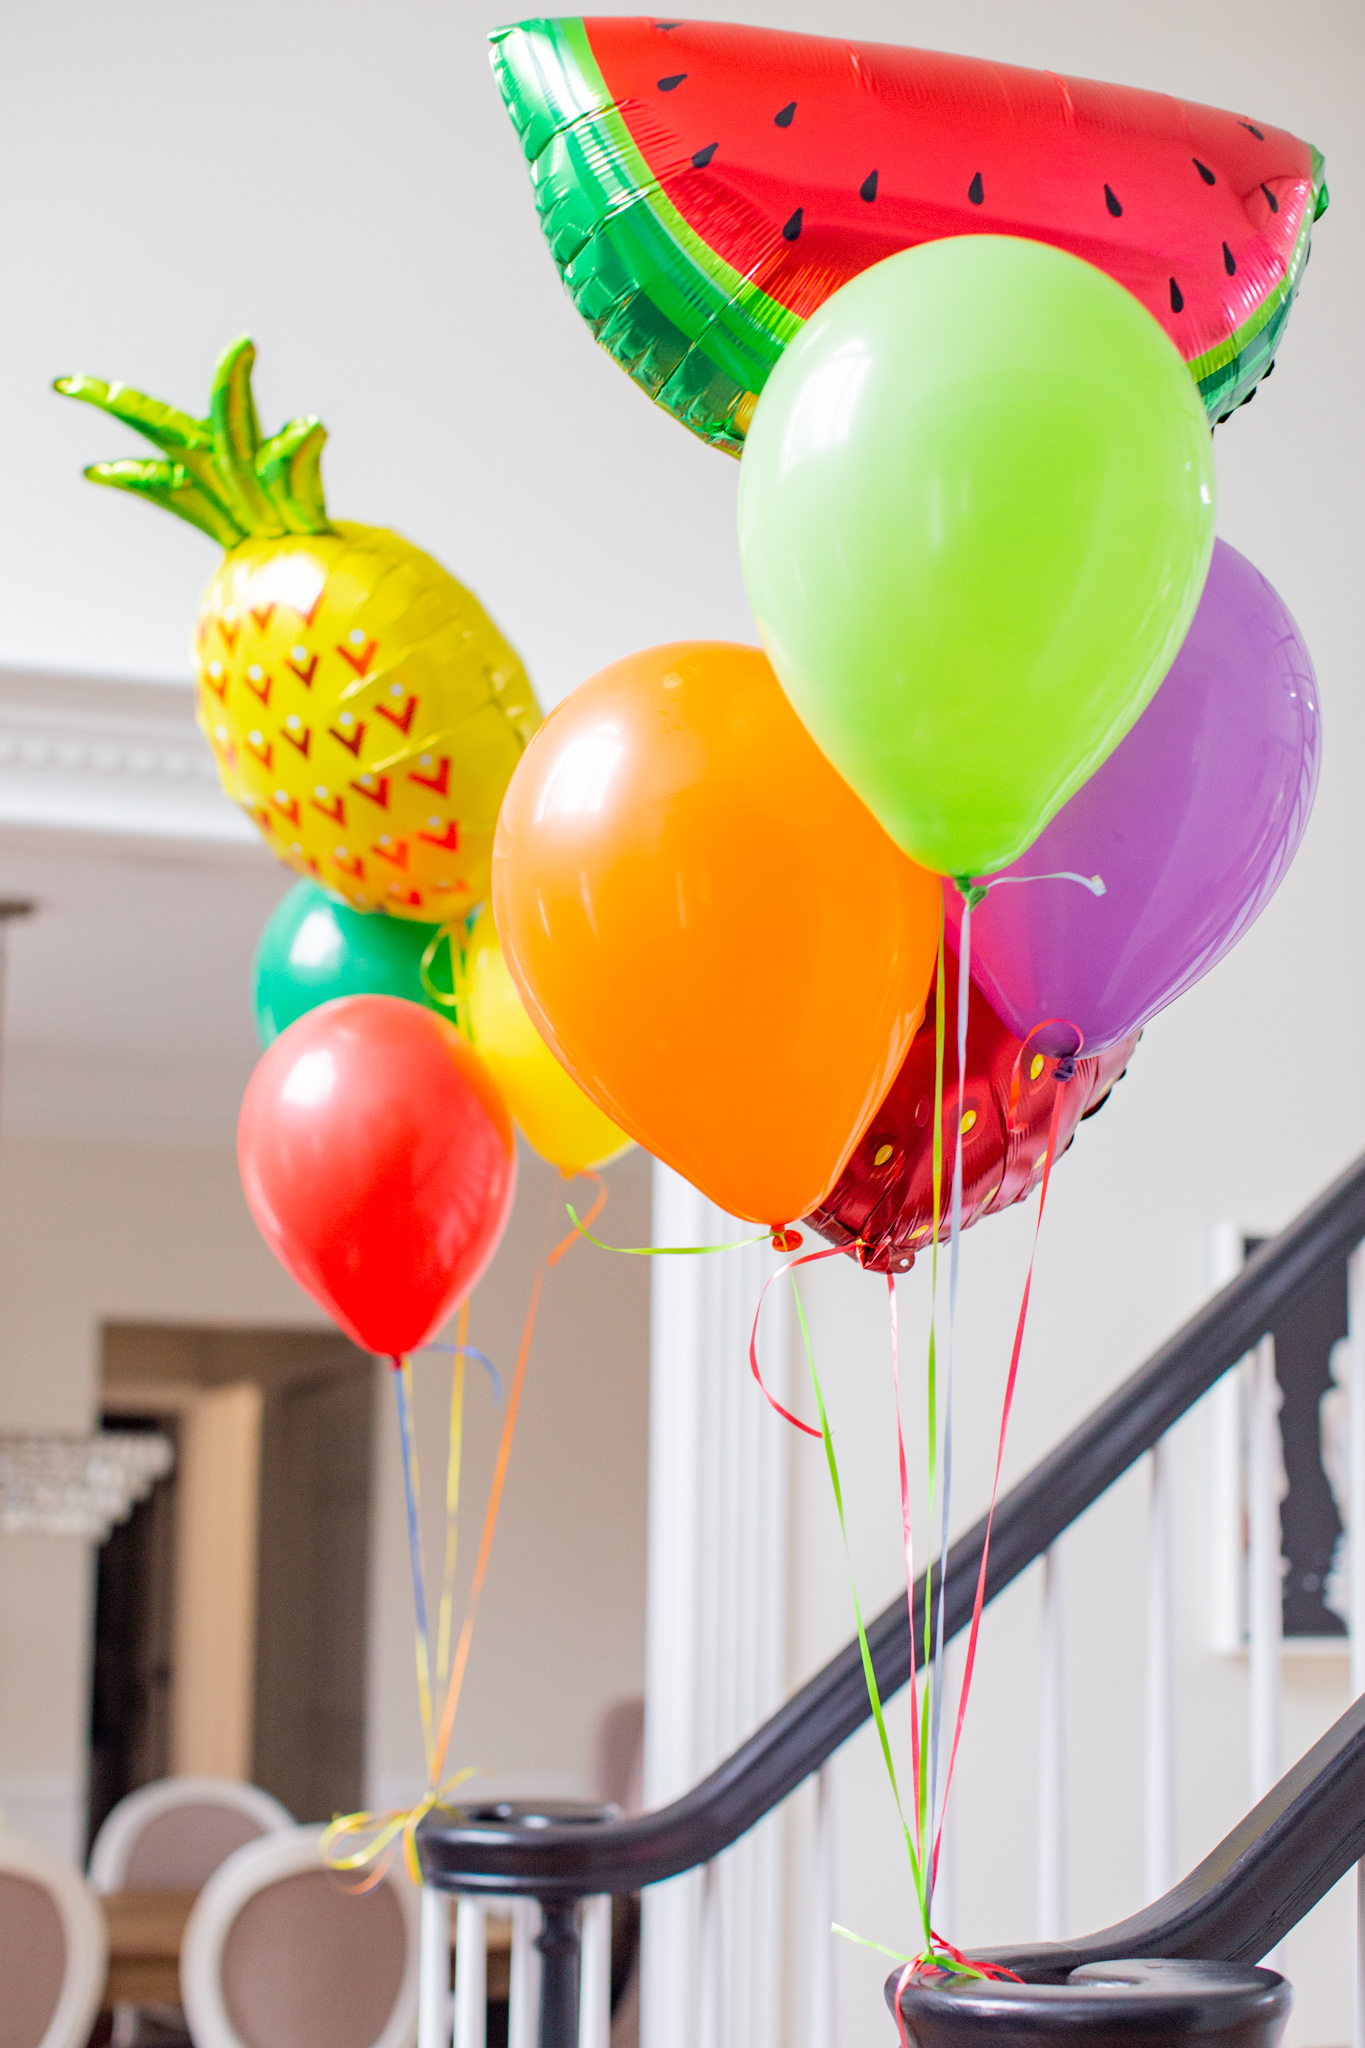 2nd Birthday Party Ideas by popular Ohio lifestyle blog, Coffee Beans and Bobby Pins: image of a staircase decorated with helium filled Mylar fruit balloons and regular helium filled balloons tied to a staircase banister. 